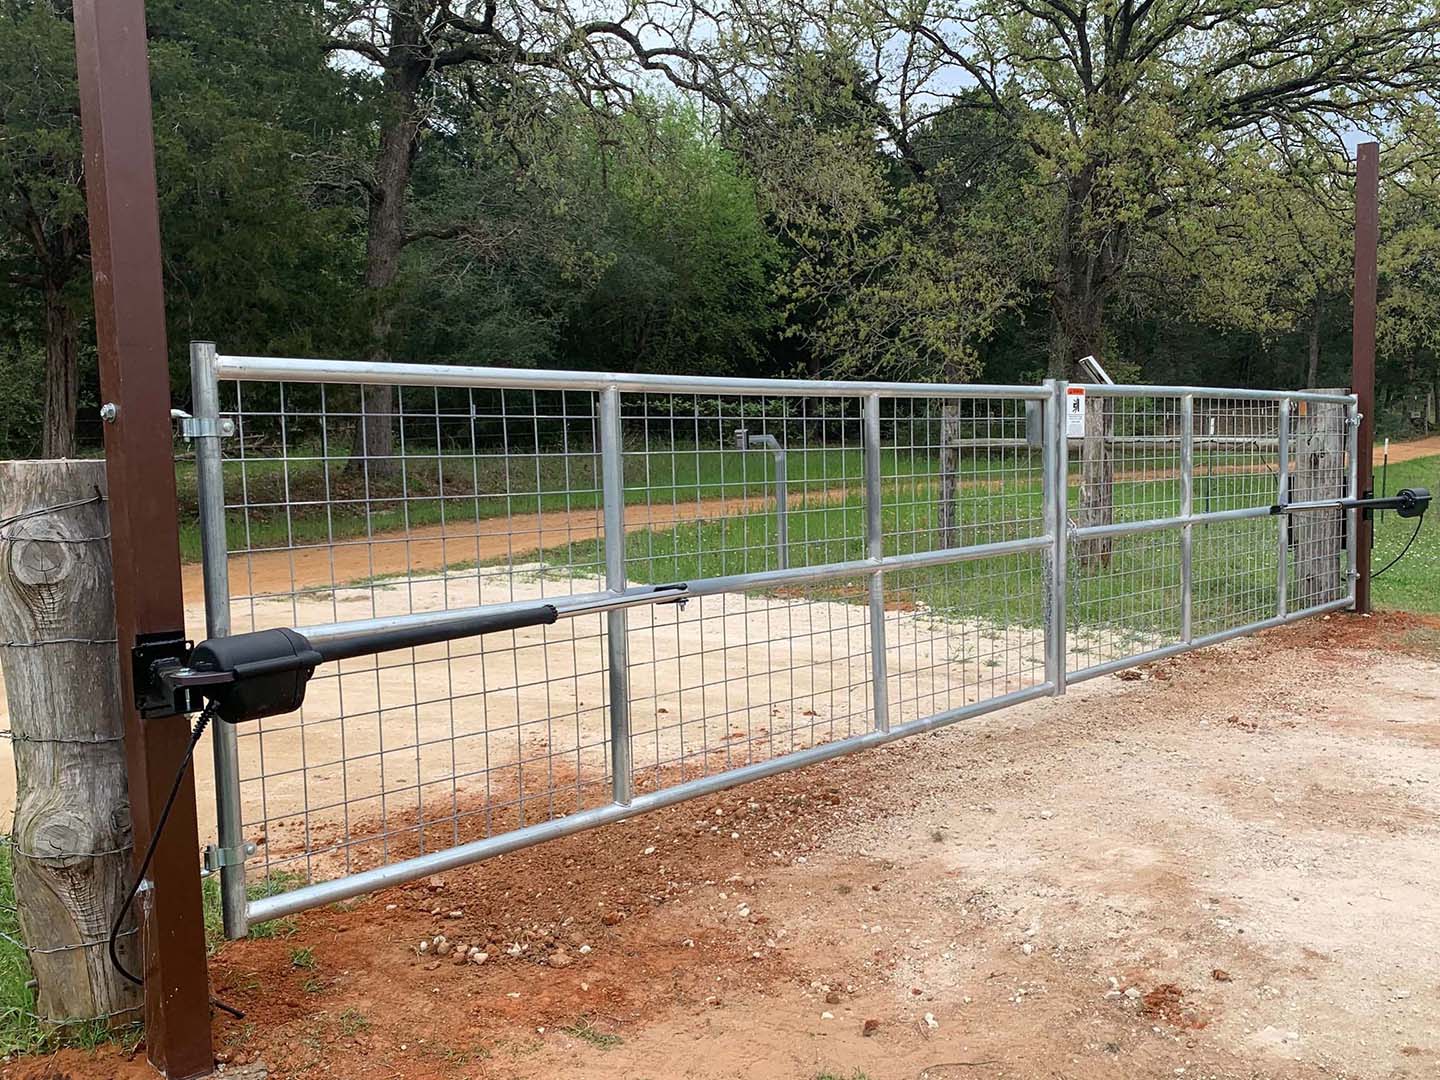 Photo of an automatic gate from a Bastrop County Texas fence company